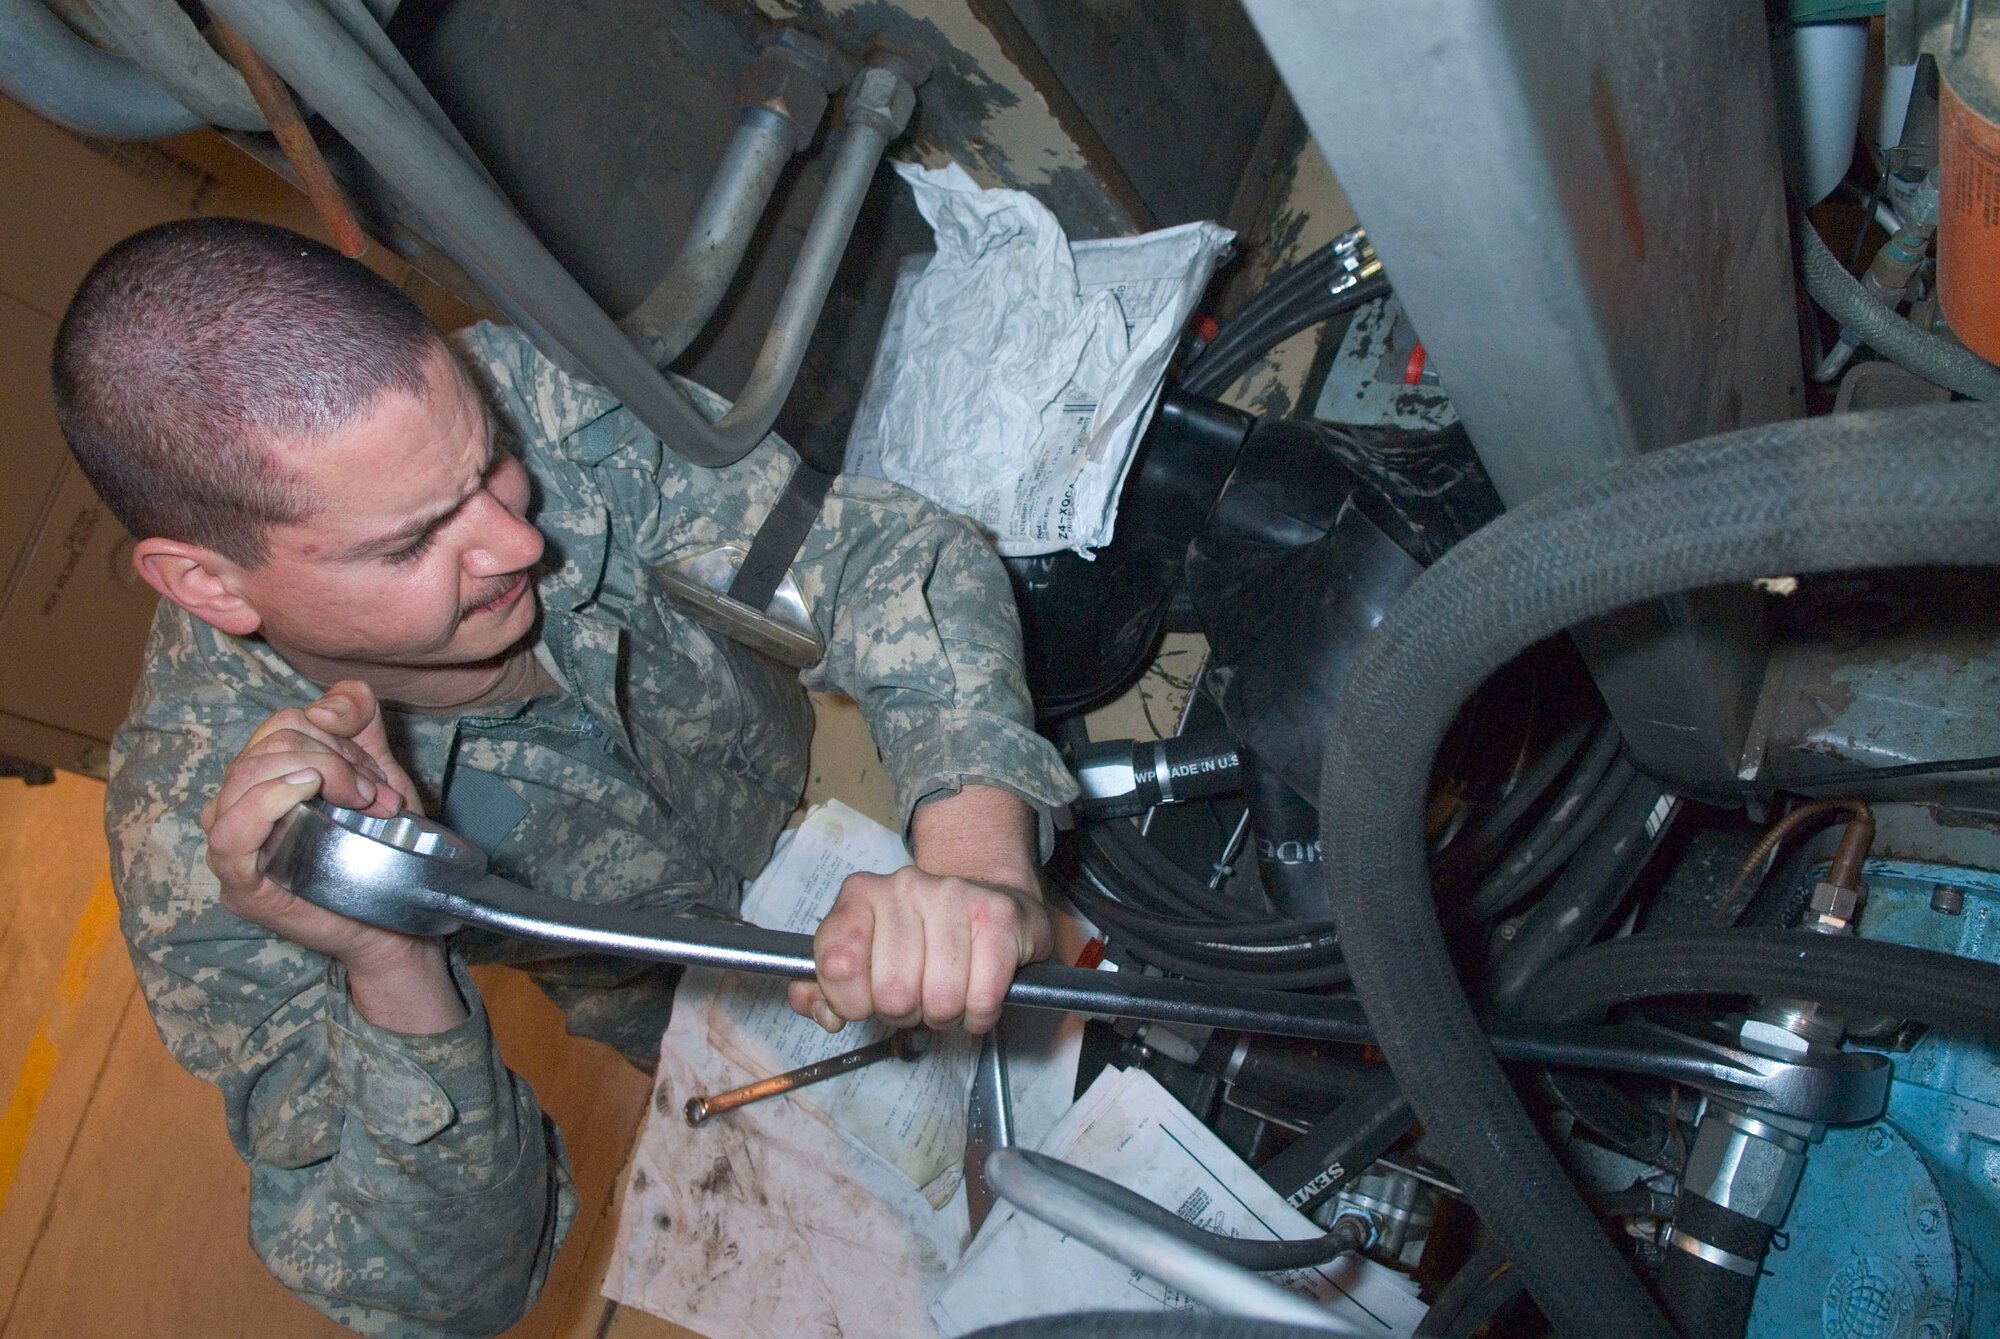 BALAD AIR BASE, Iraq -- Staff Sgt. Bobby Hausermann, a 332nd Expeditionary Maintenance Squadron aircraft ground equipment maintainer, replaces a tube on a hydraulic test stand here, Jan. 5. The hydraulic test stand provides hydraulic pressure for aircraft while they are on ground. Sergeant Hausermann is deployed from Spangdahlem Air Base, Germany. (Air Force photo/Staff Sgt. Joshua Garcia) 